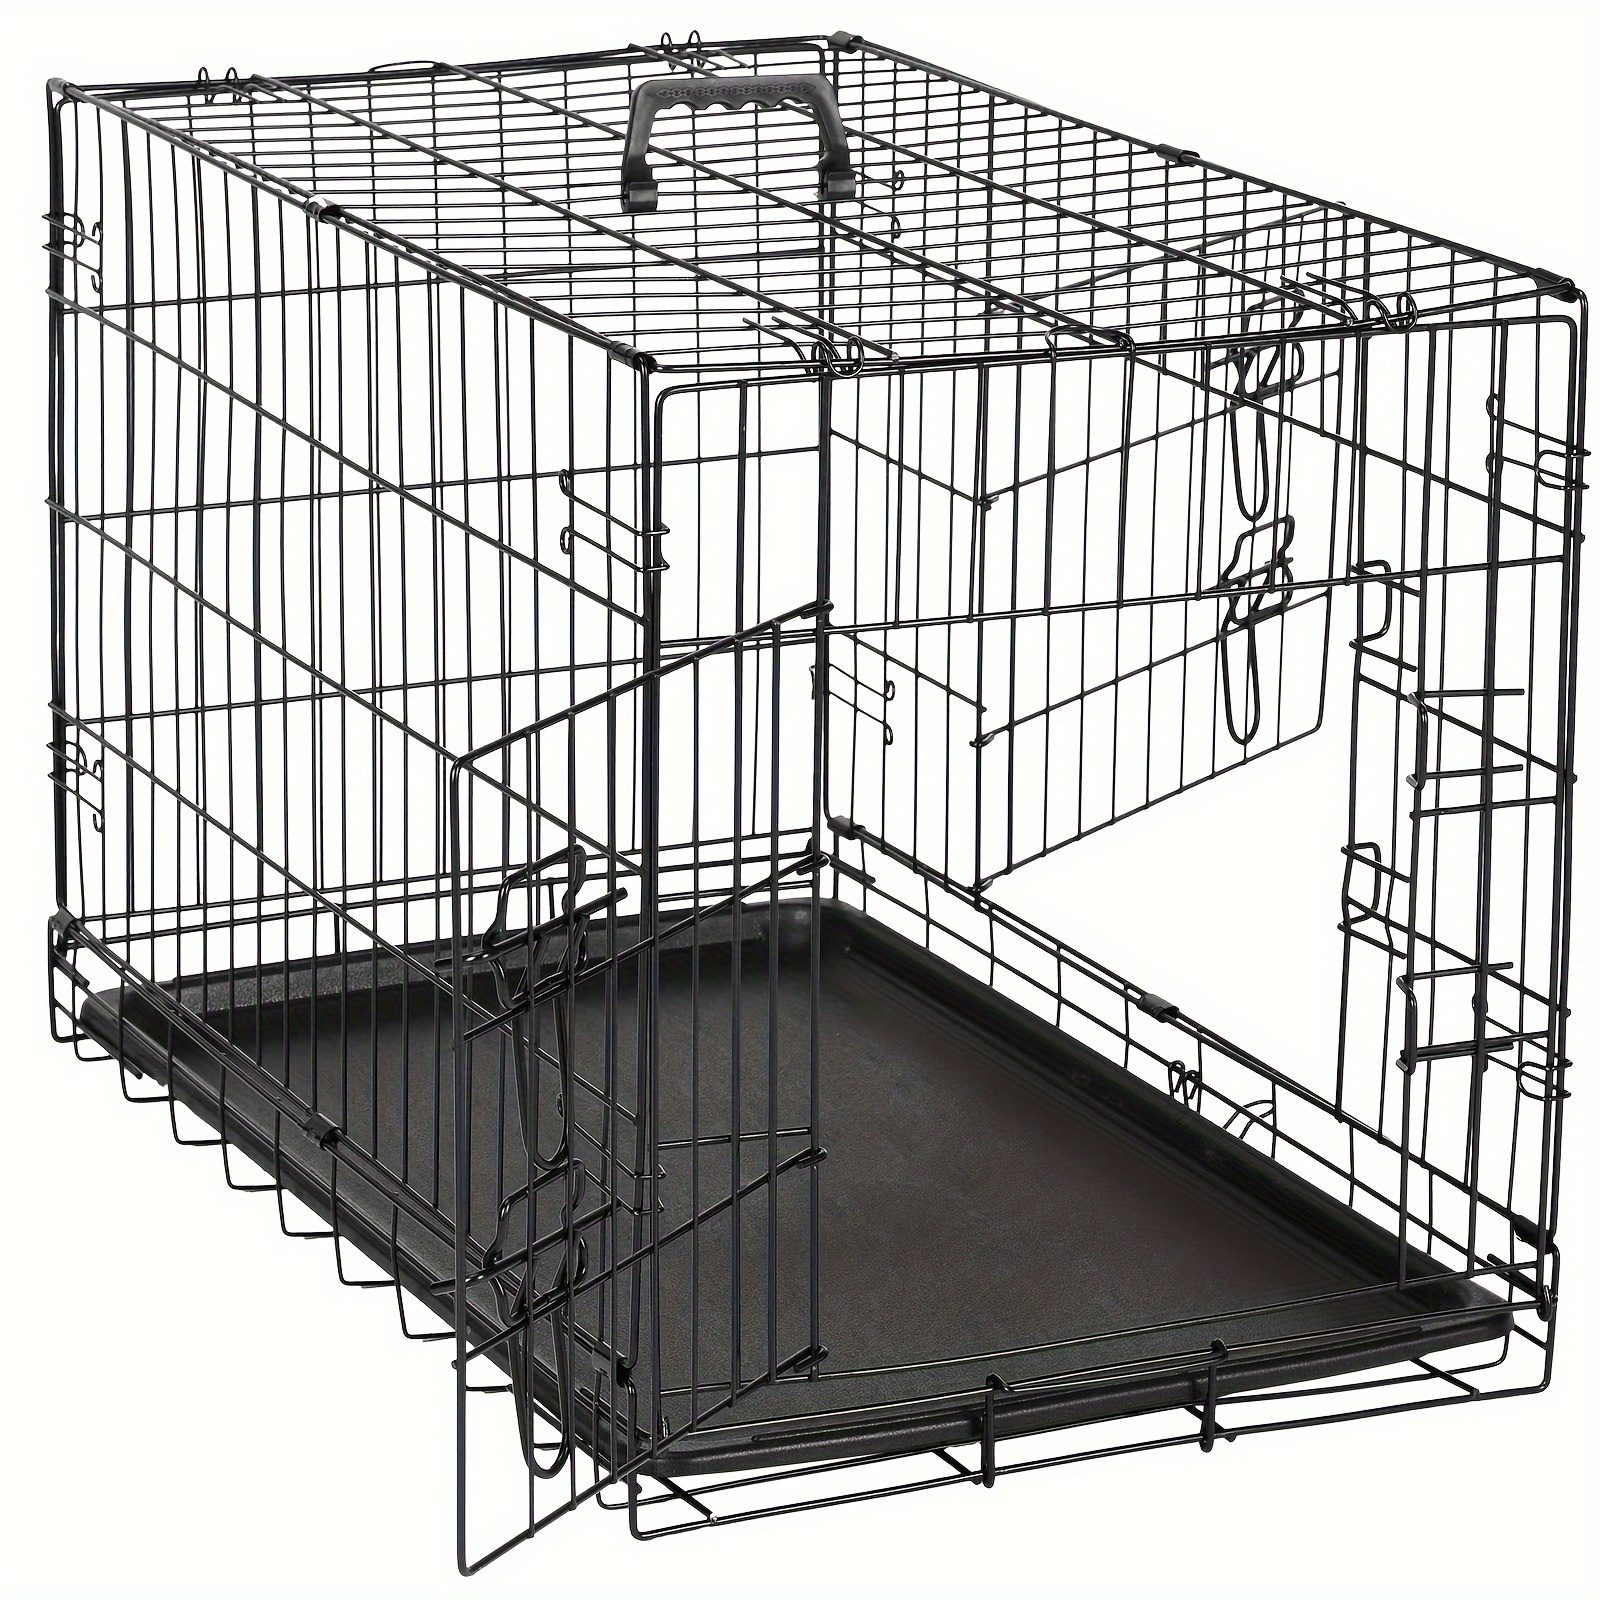 

Smug Medium Dog Crate With Divider Panel, 30 Inch Double Door Folding Metal Wire Dog Cage With Plastic Leak-proof Pan Tray, Pet Kennel For Indoor, Outdoor, Travel